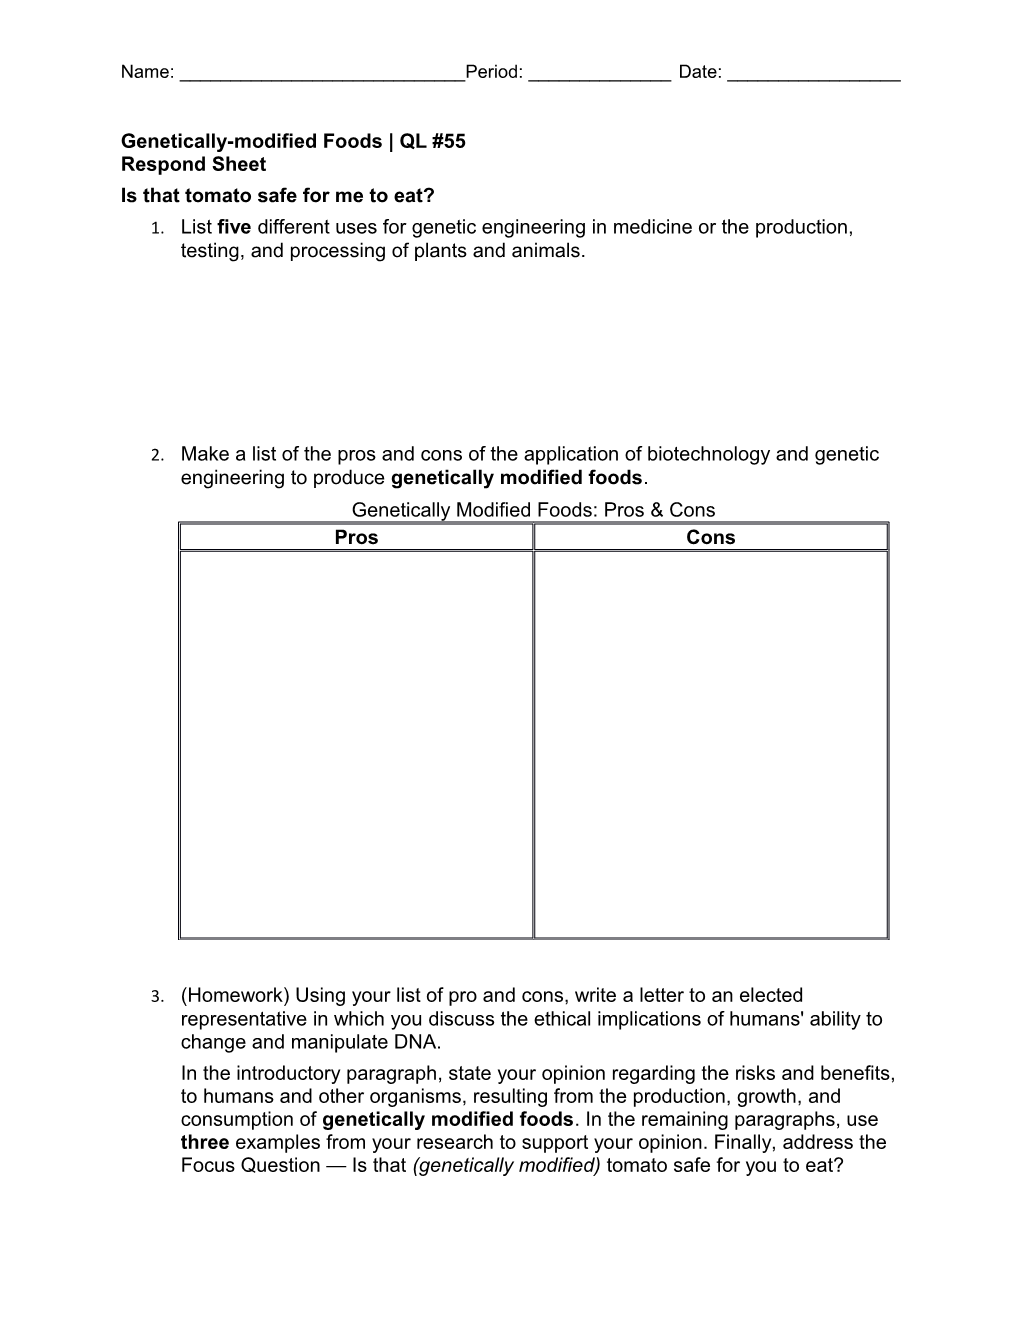 Genetically-Modified Foods QL #55 Respond Sheet